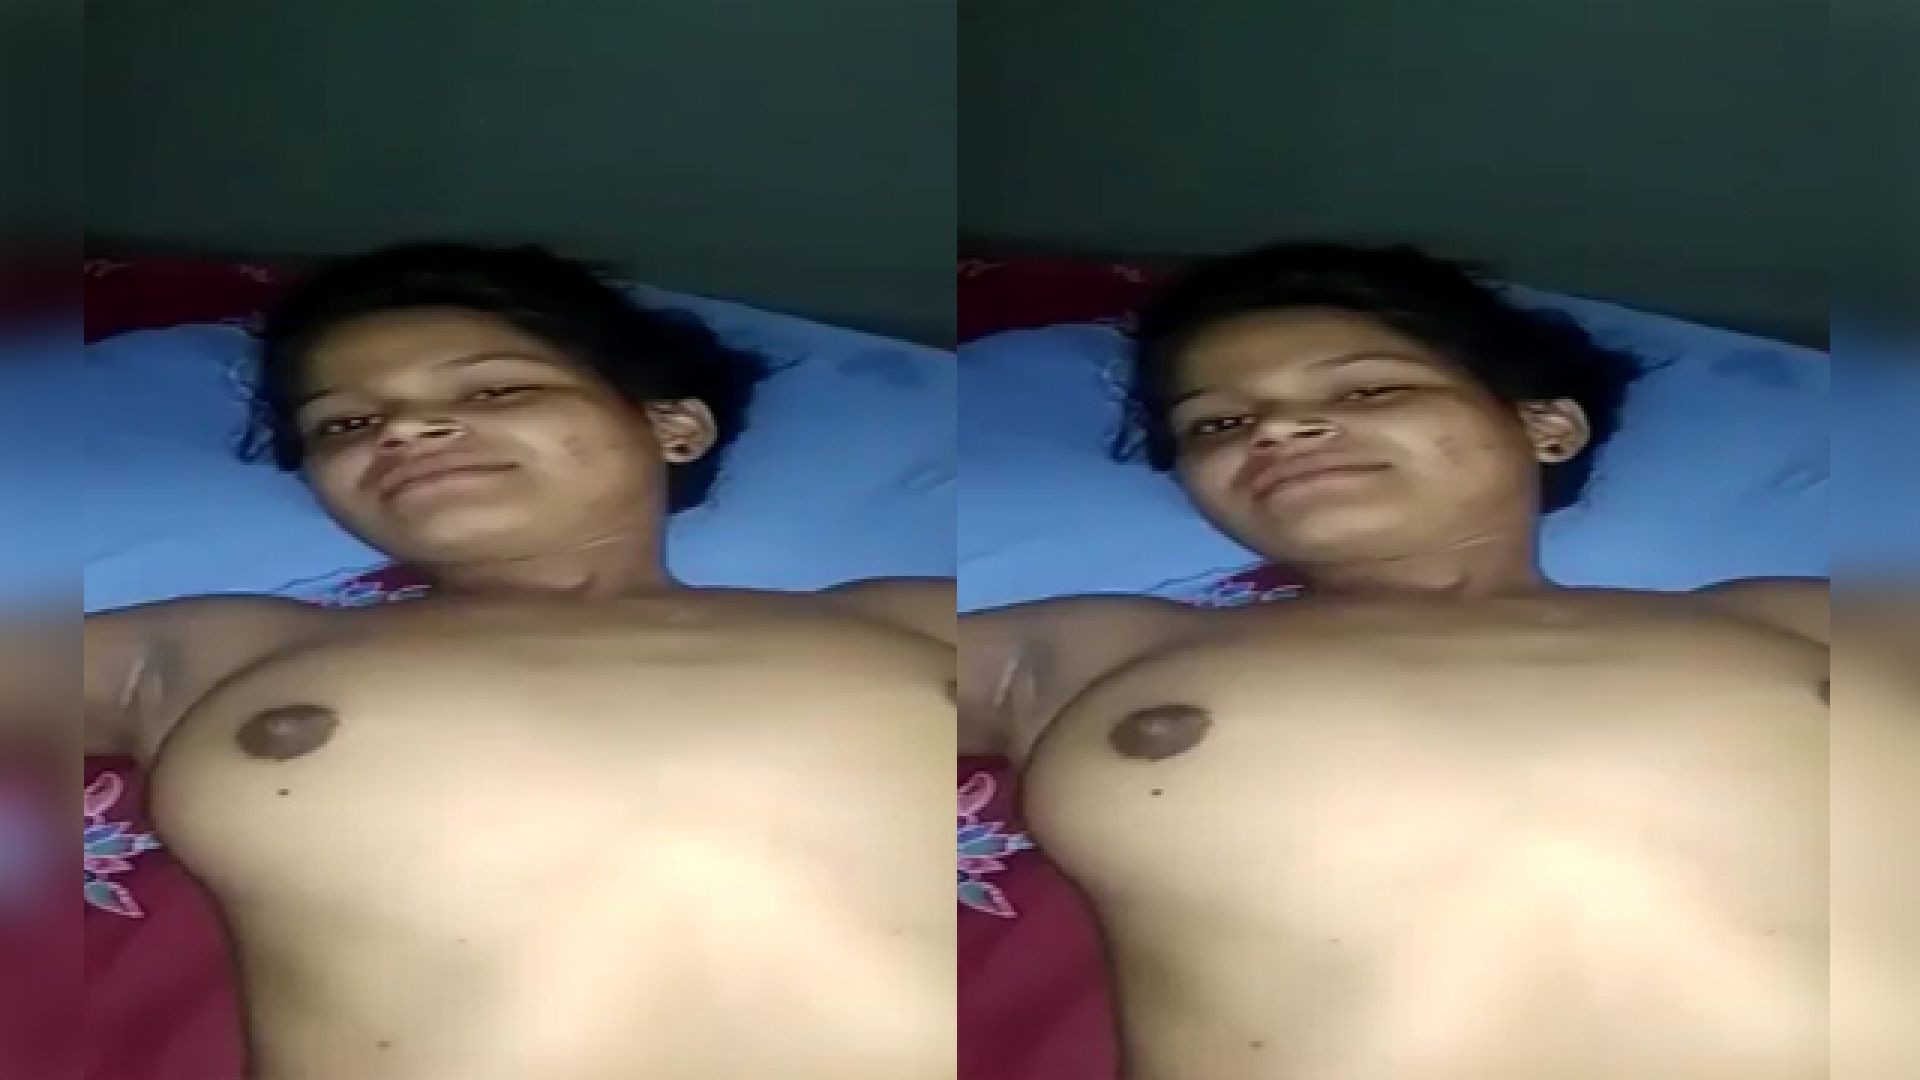 Indian Couple Fucking With Talk